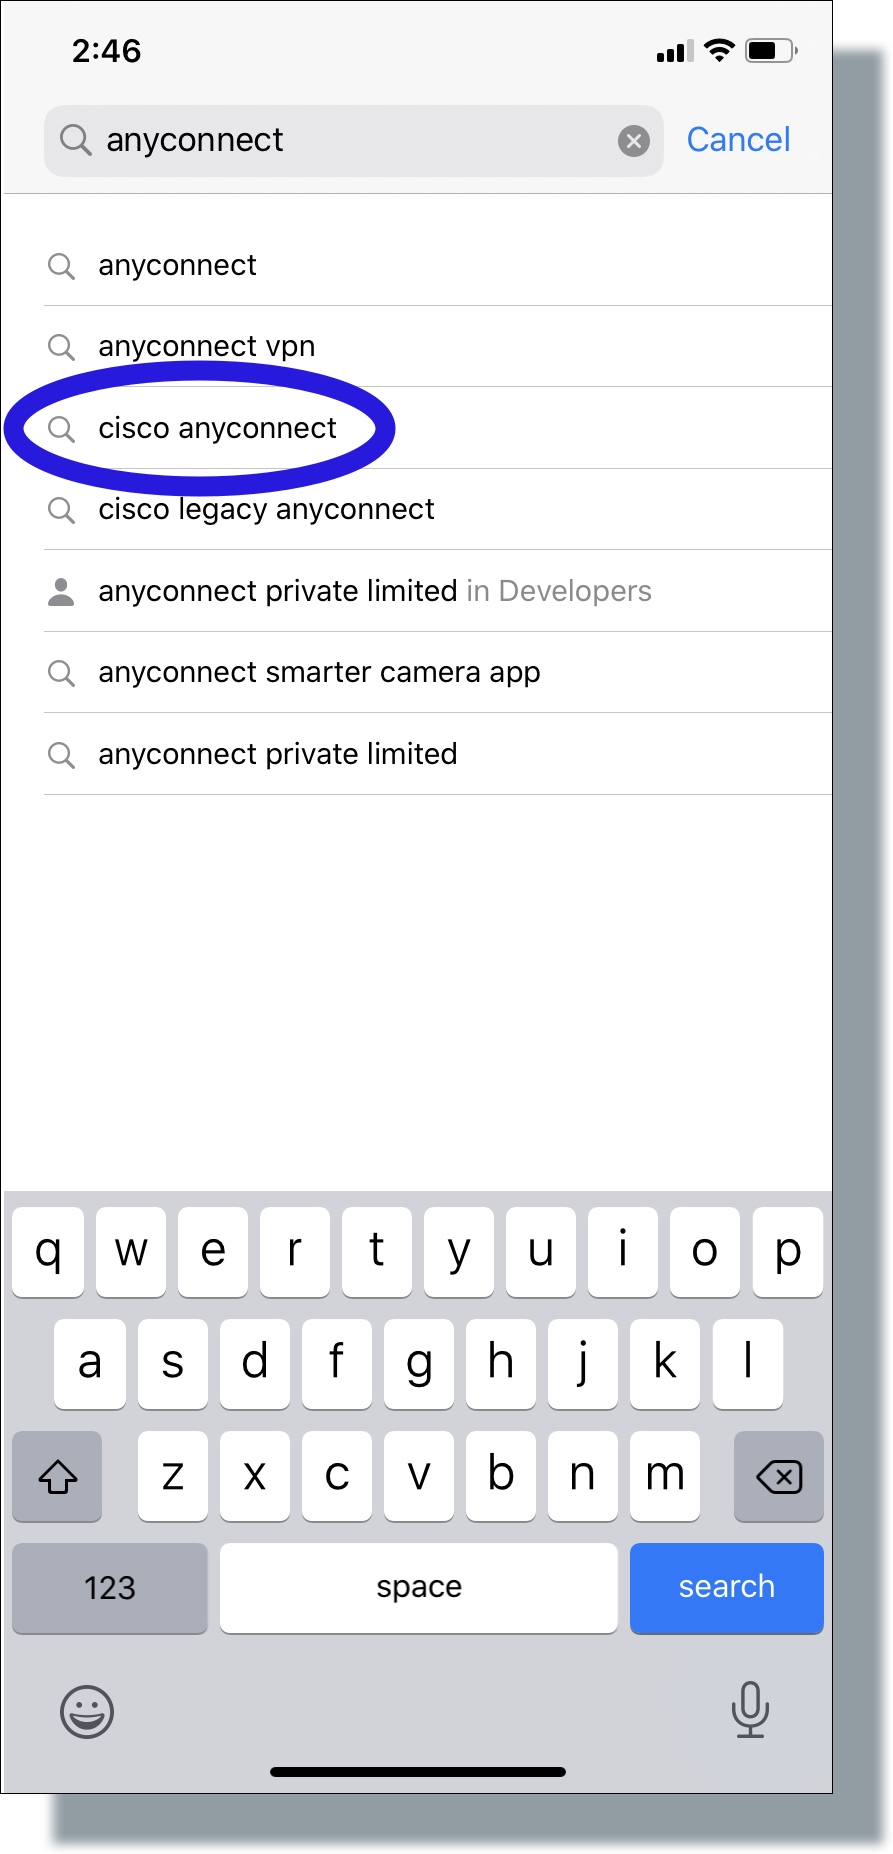 Tap 'cisco anyconnect' from search results